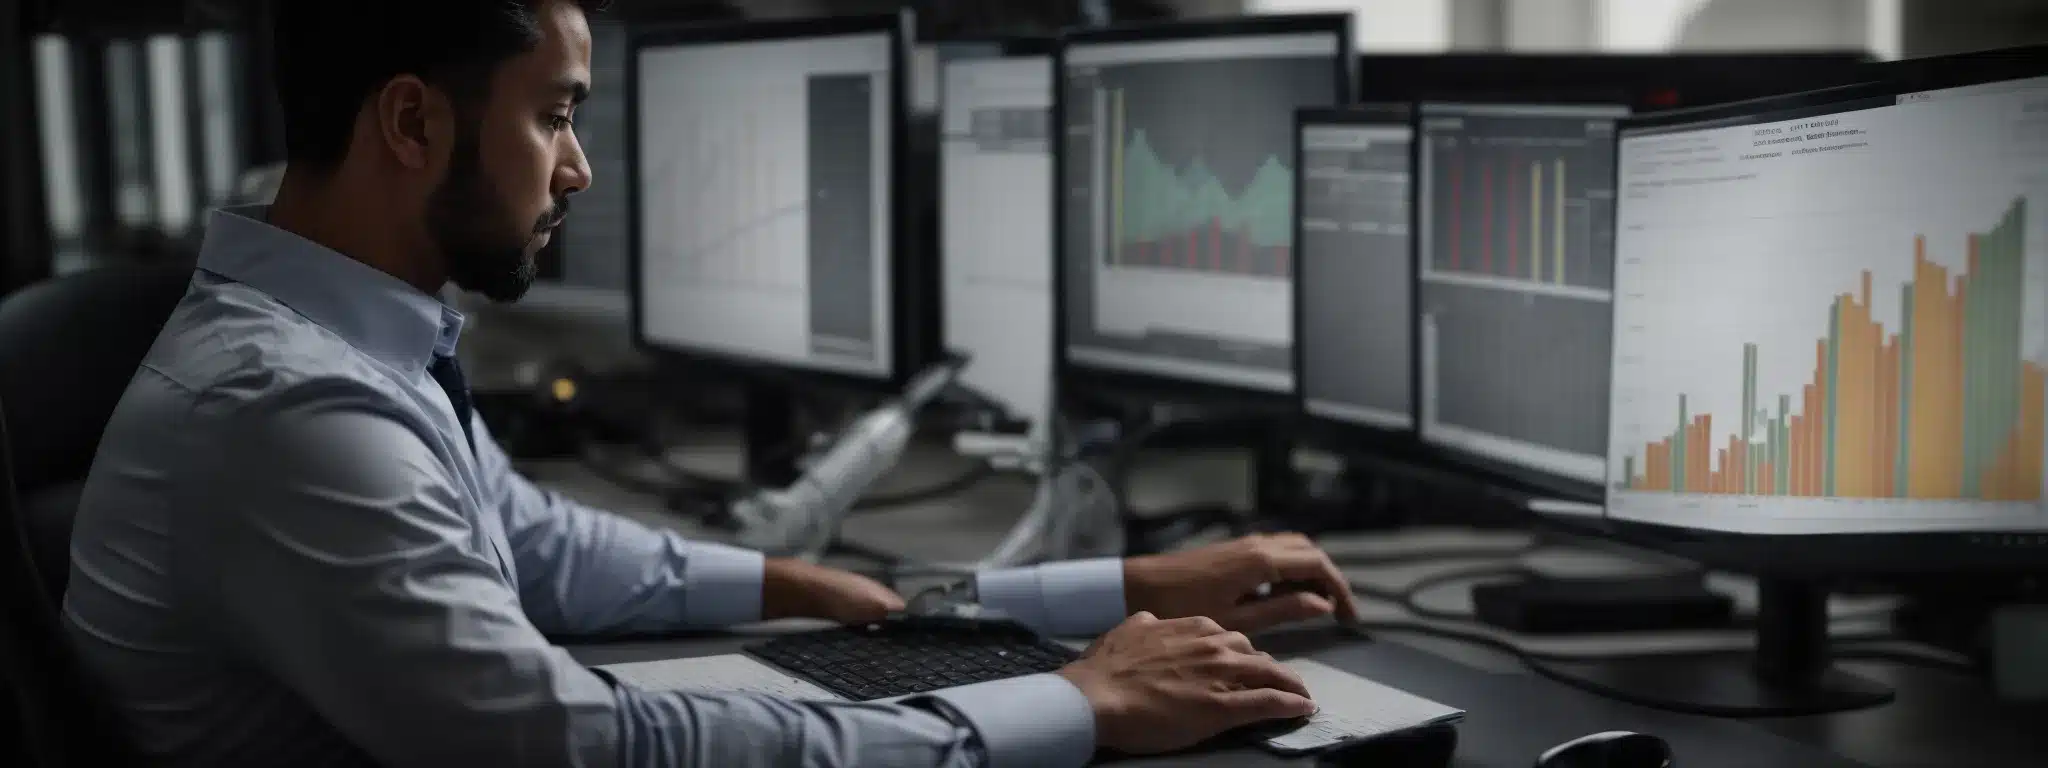 A Diligent Entrepreneur Is Analyzing Charts And Graphs On A Computer Screen, Reflecting The Analysis Of Business Performance Metrics.